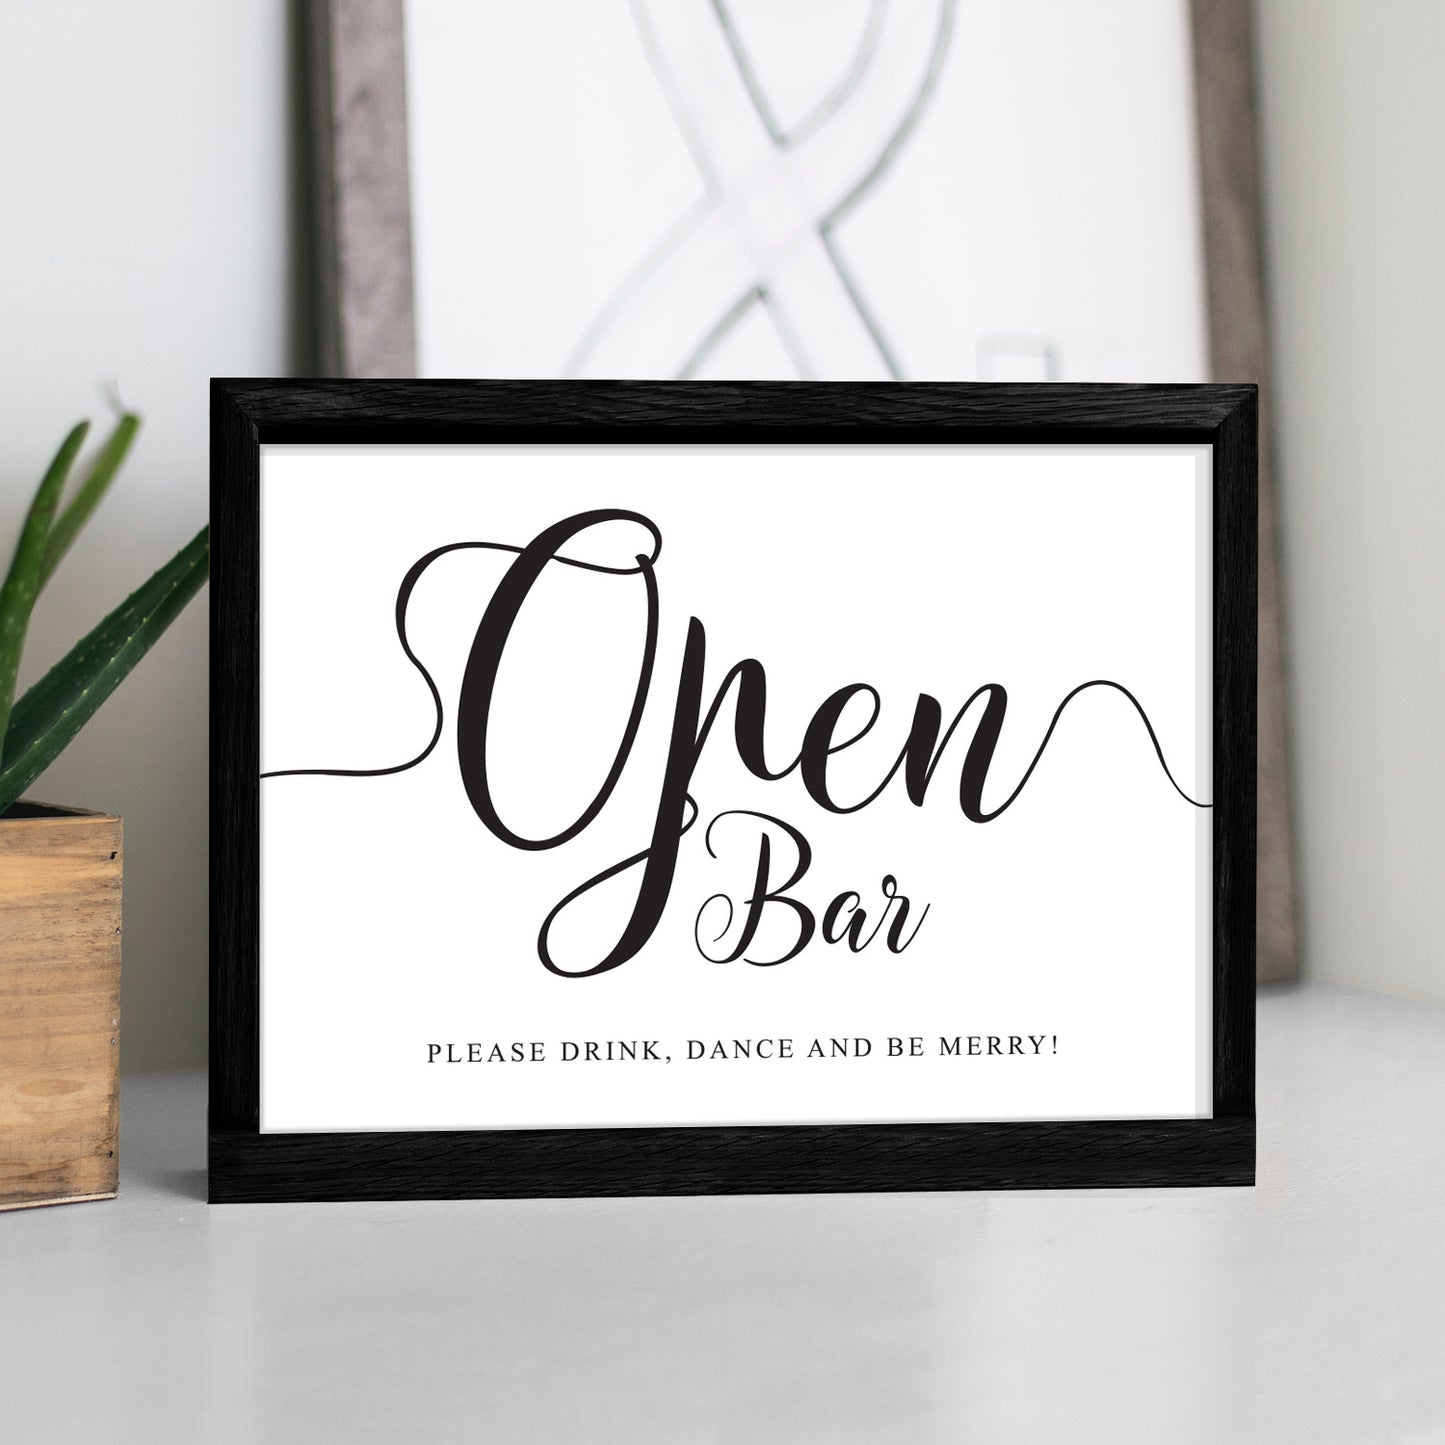 Paid bar sign. Printable wedding signage. Instant download